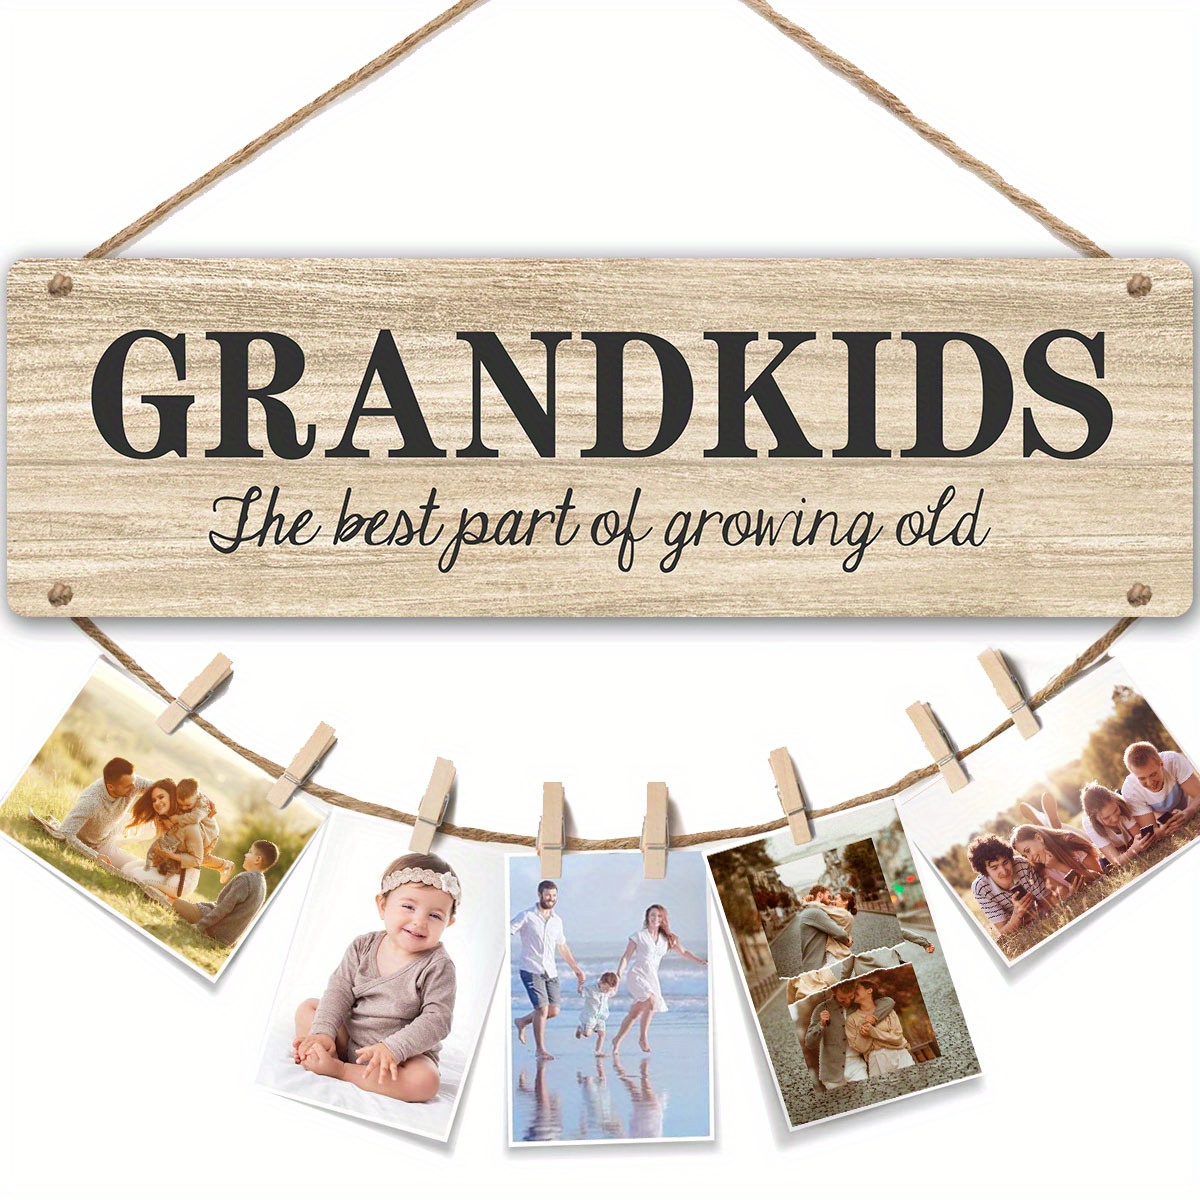 

1 Set, Gifts For Grandma & Grandpa From Grandchildren, Side By Side Or Miles Apart Grandkids Photo Holder, Best Christmas Or Birthday Gifts For Grandparents From Granddaughter And Grandson